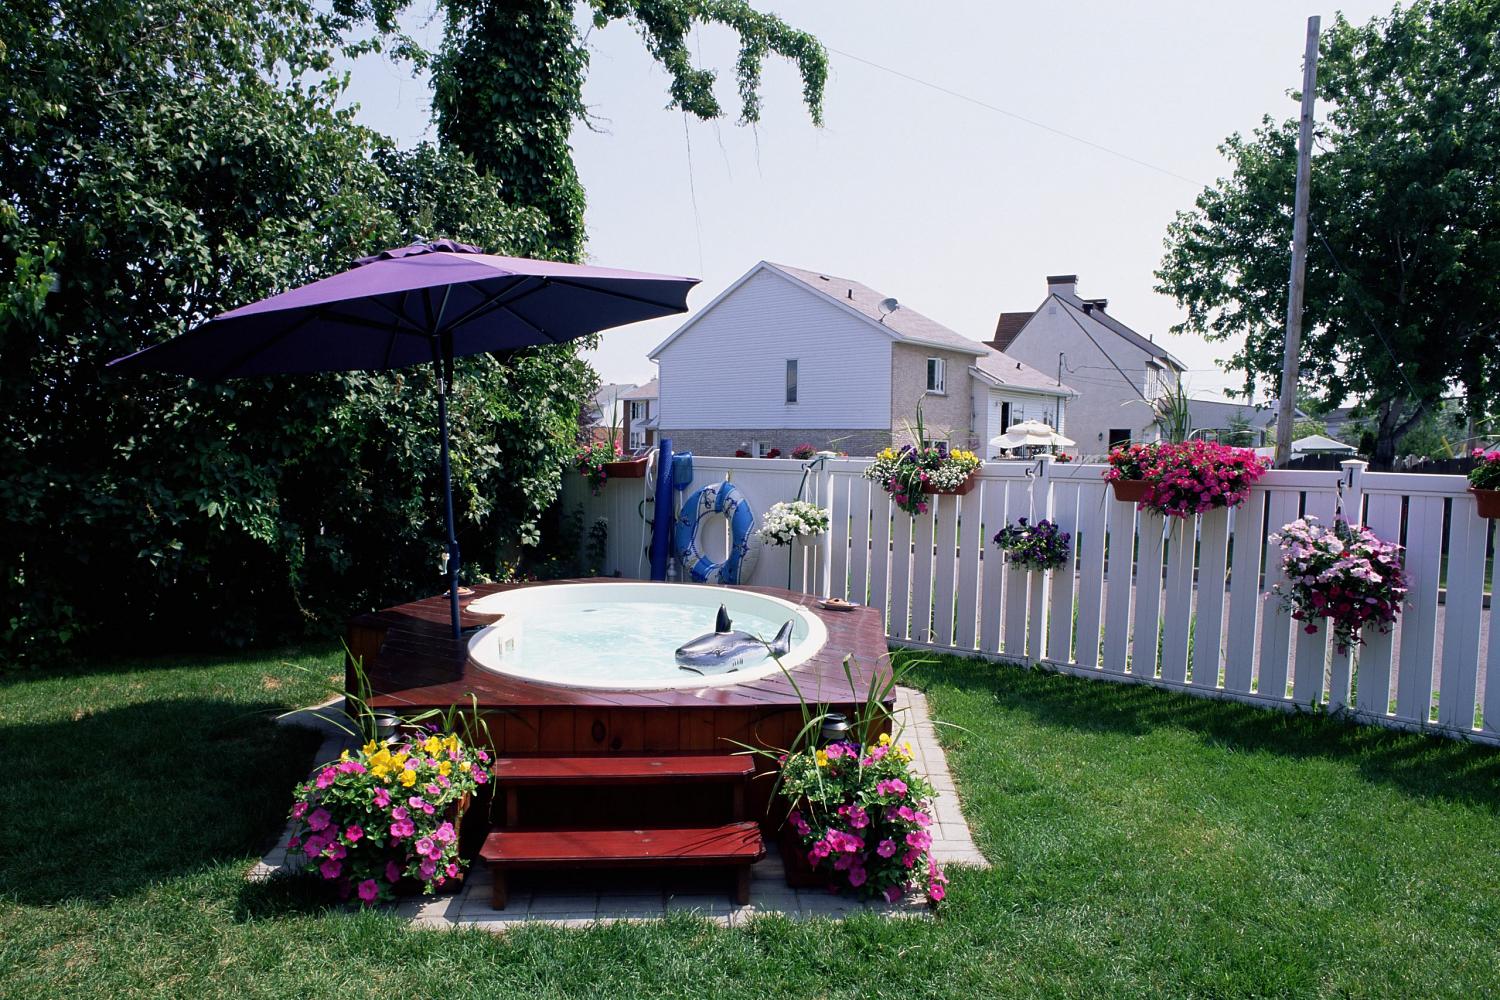 A hot tub in a back yard with umbrella and stairs